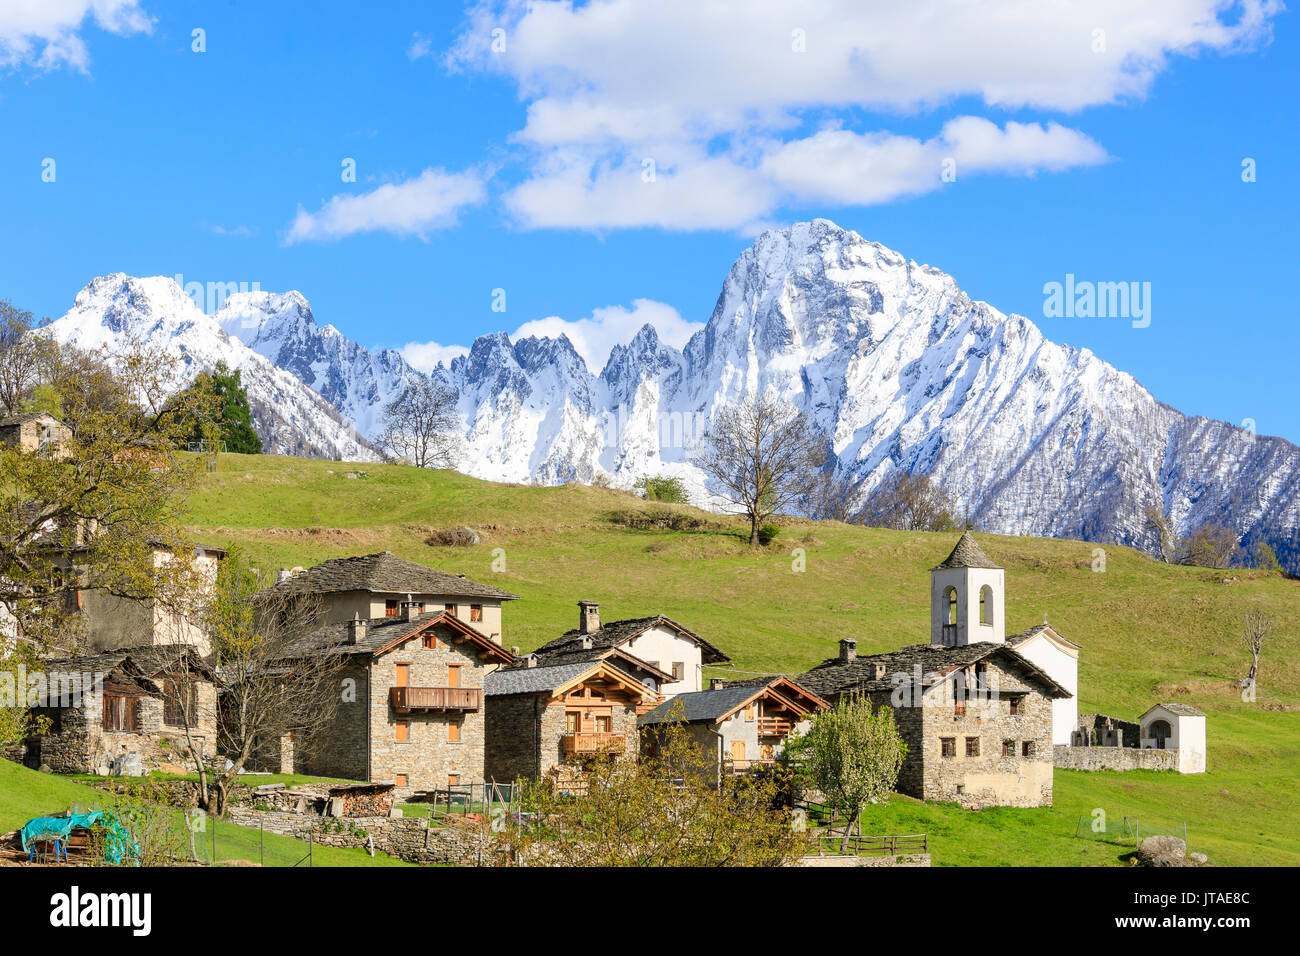 Alpine village and meadows framed by the snowy peak of Pizzo di Prata, Daloo, Chiavenna Valley, Valtellina, Lombardy, Italy Stock Photo